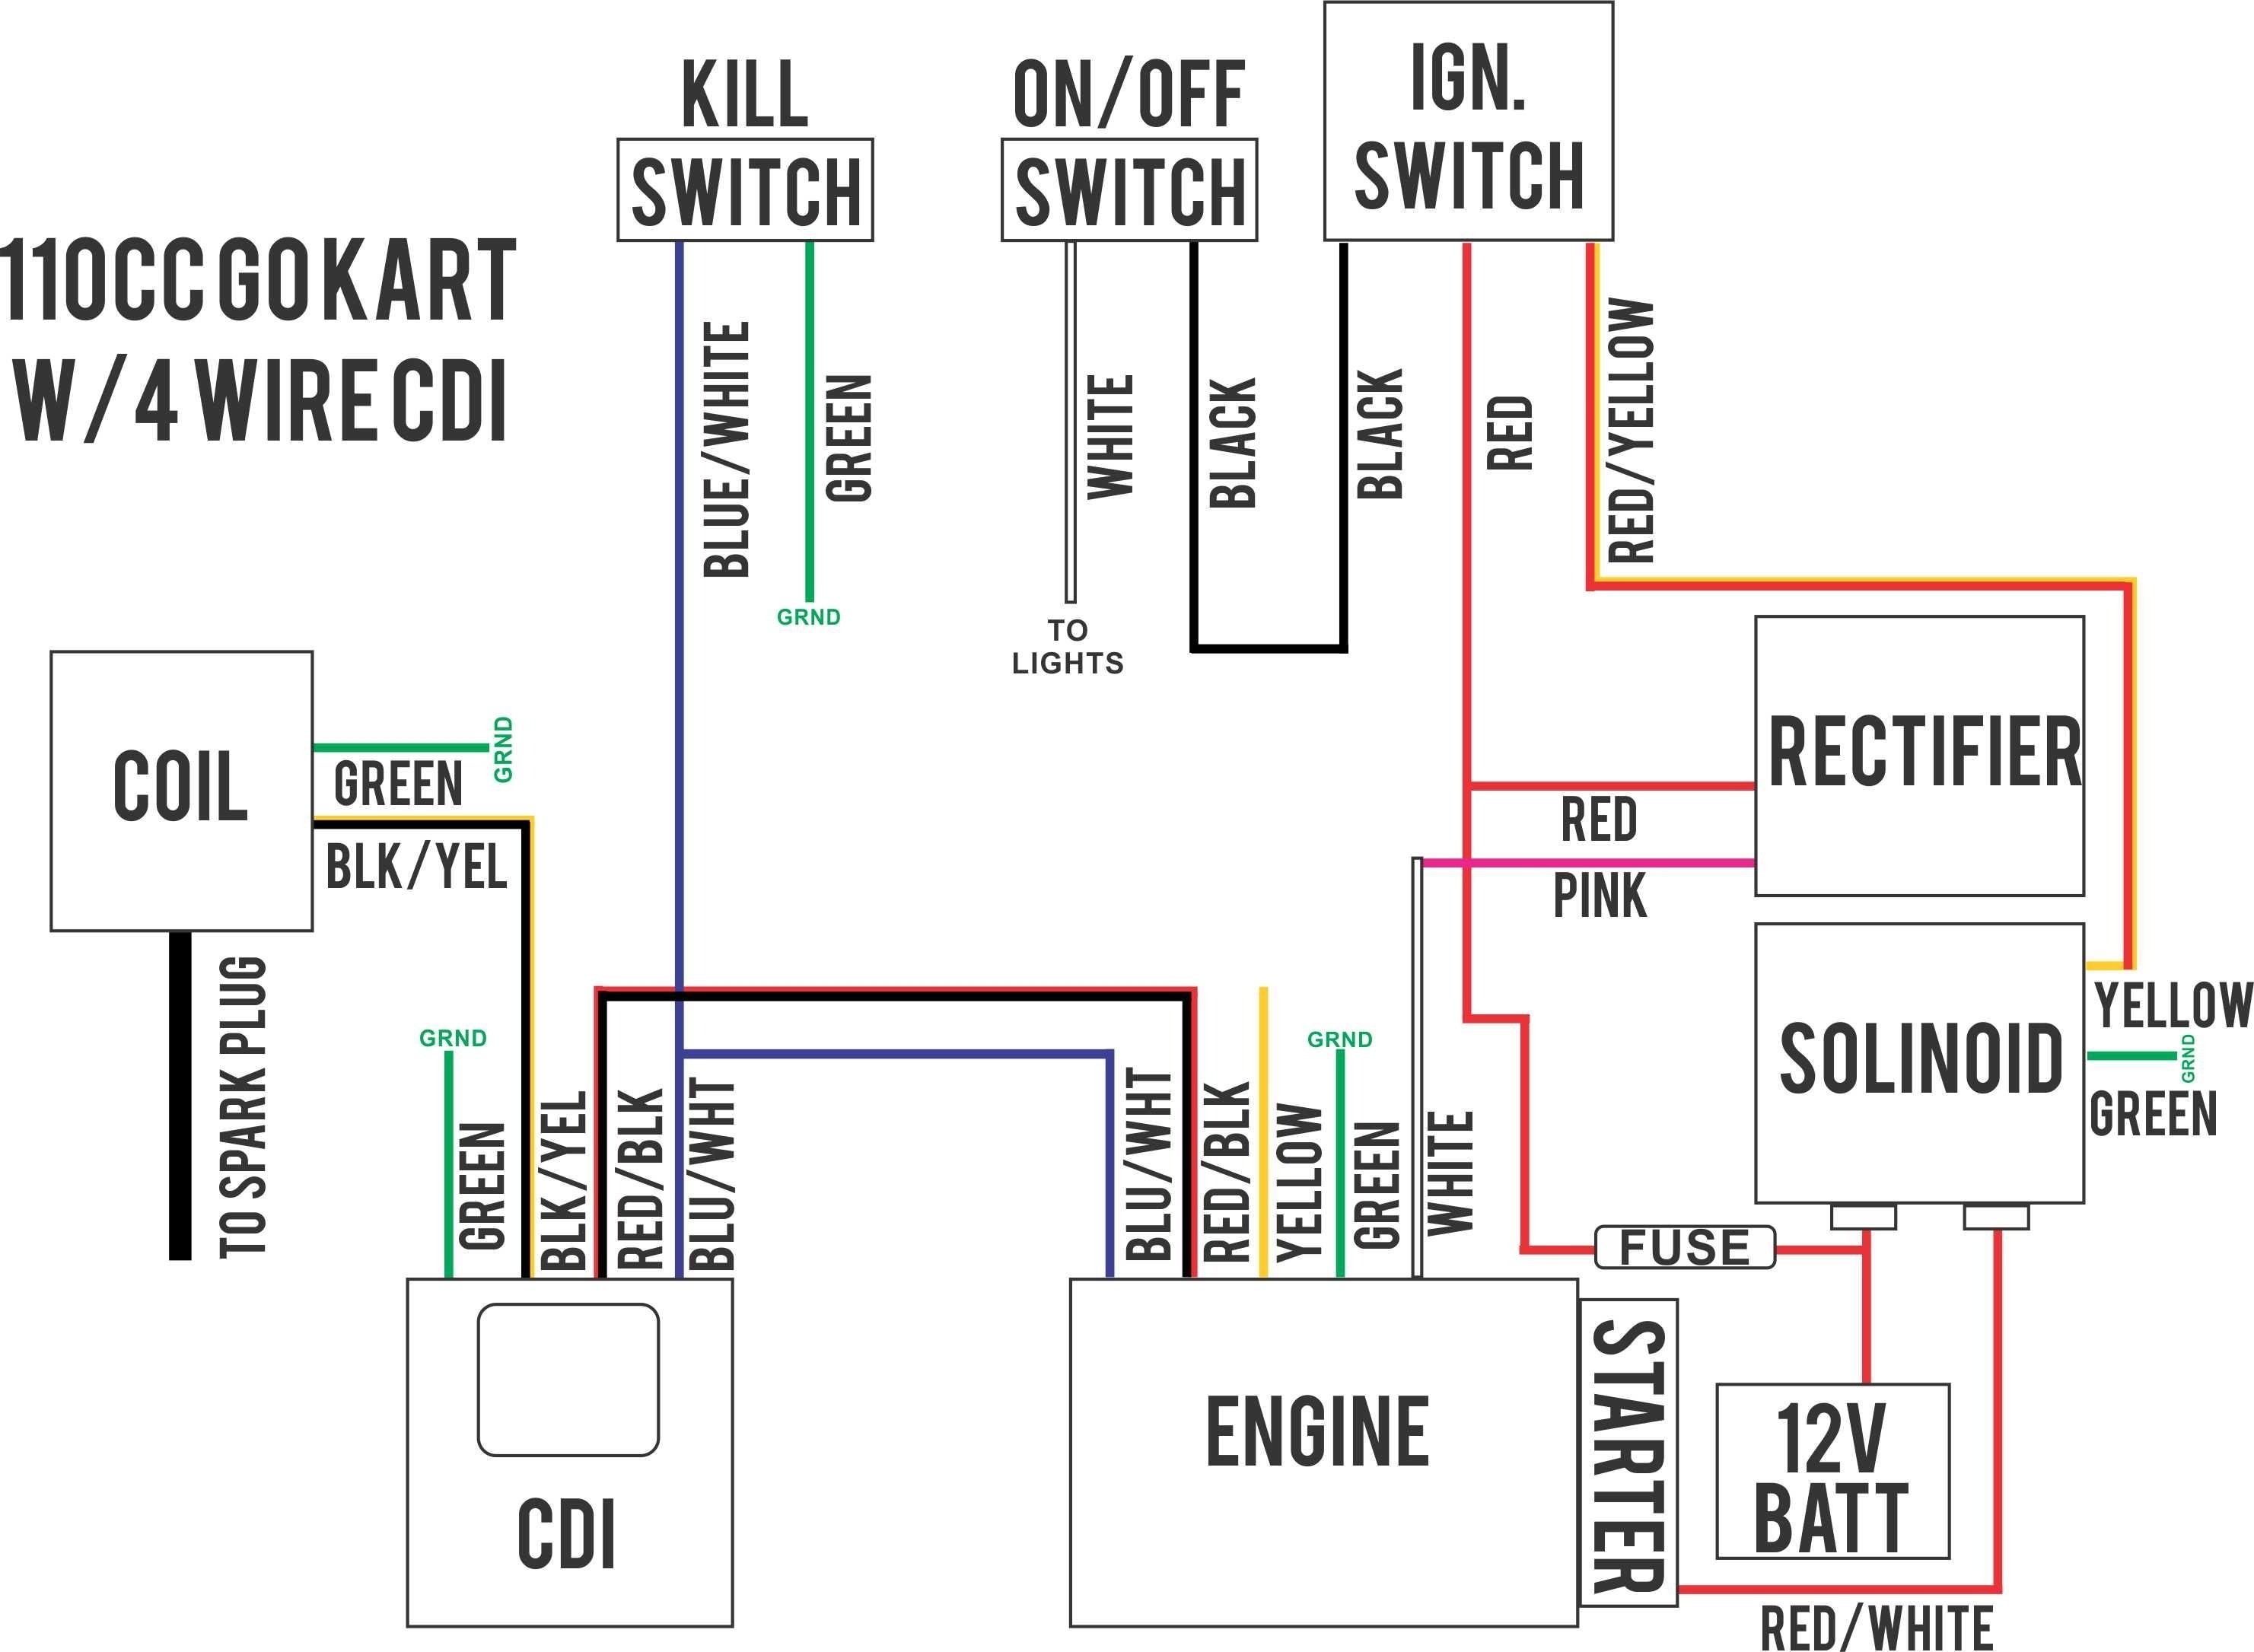 Wiring Diagram for Race Car New Car Ignition Wiring Diagram Introduction to Electrical Wiring